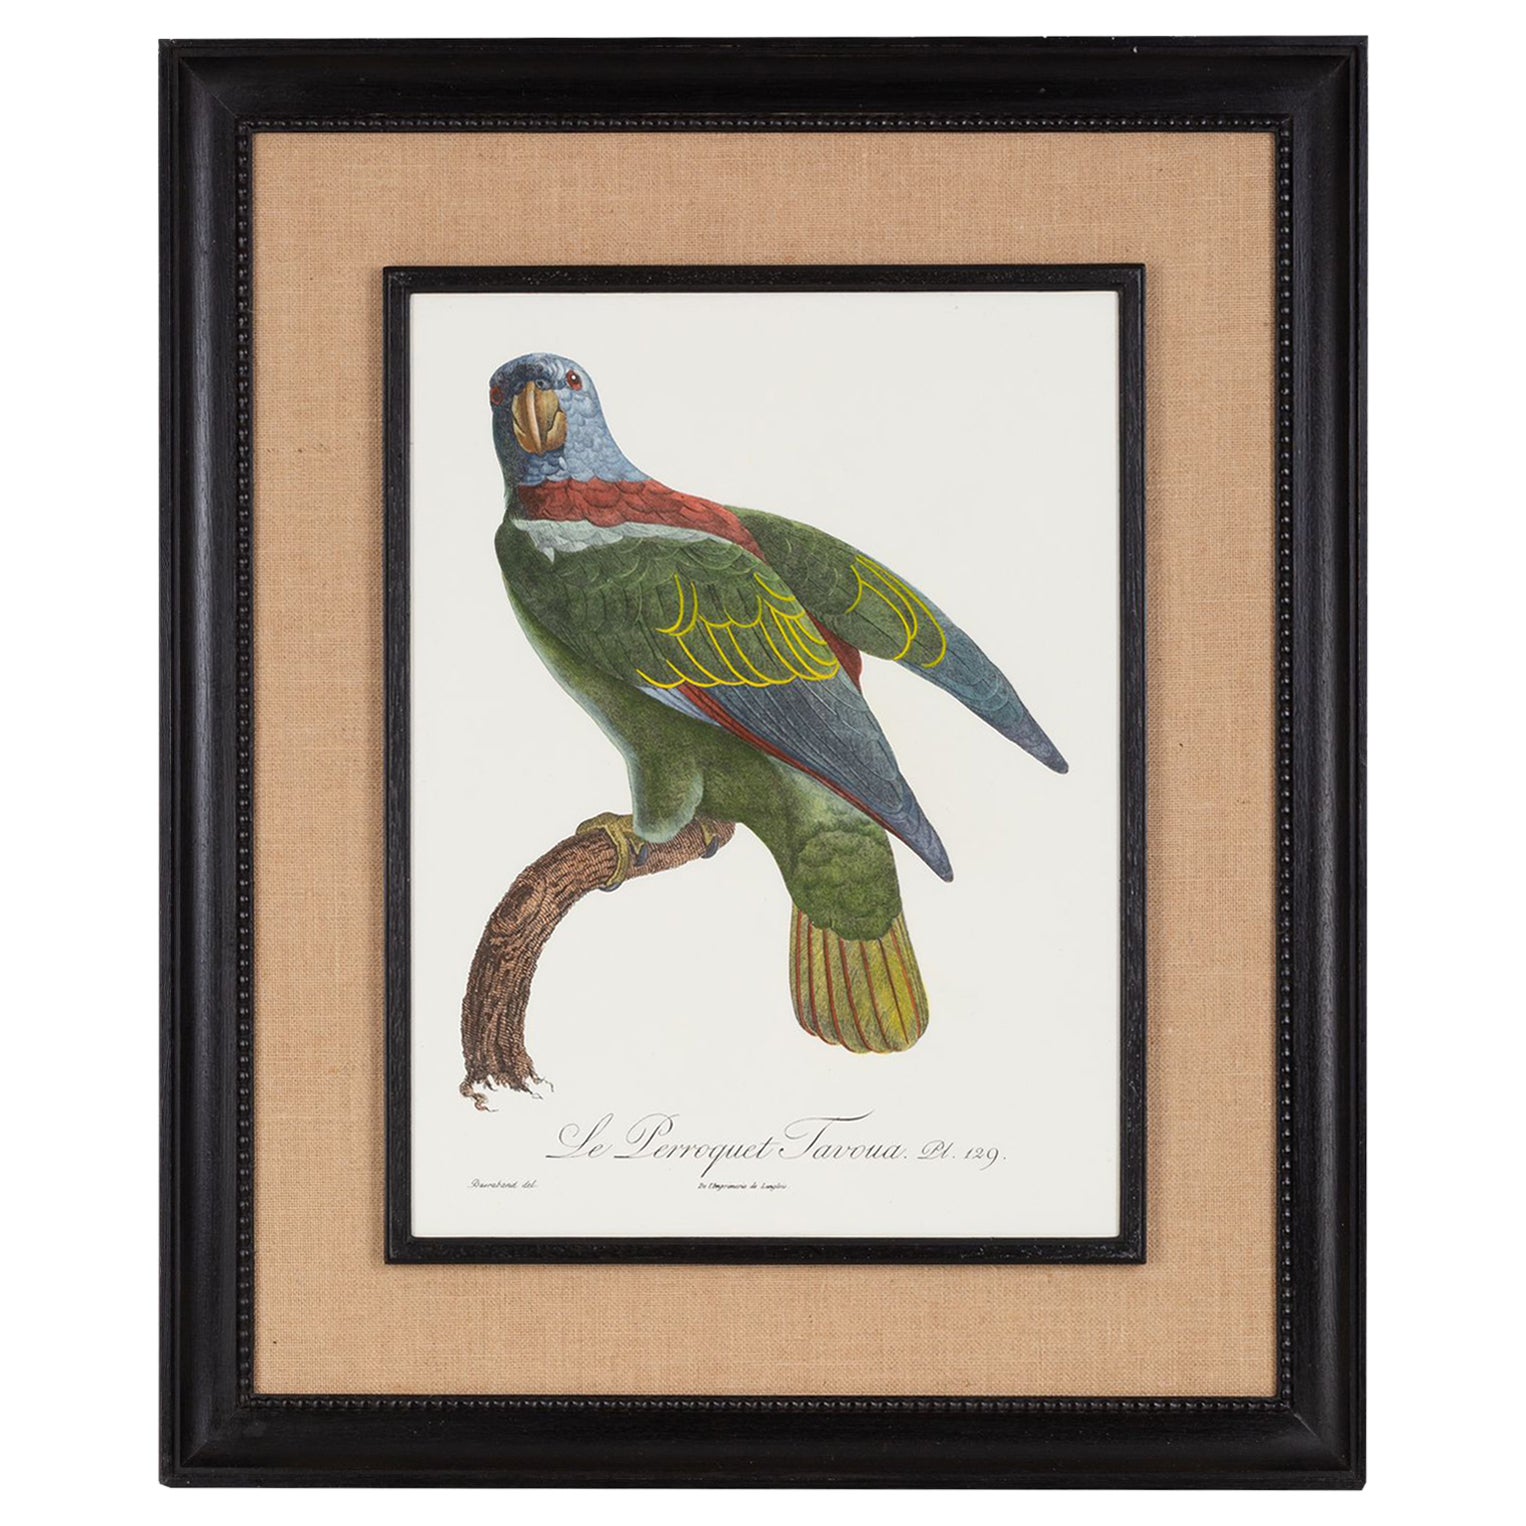 Italian Contemporary HandColored Print "Le Parroquet" Wood and Jute Frame 2 of 2